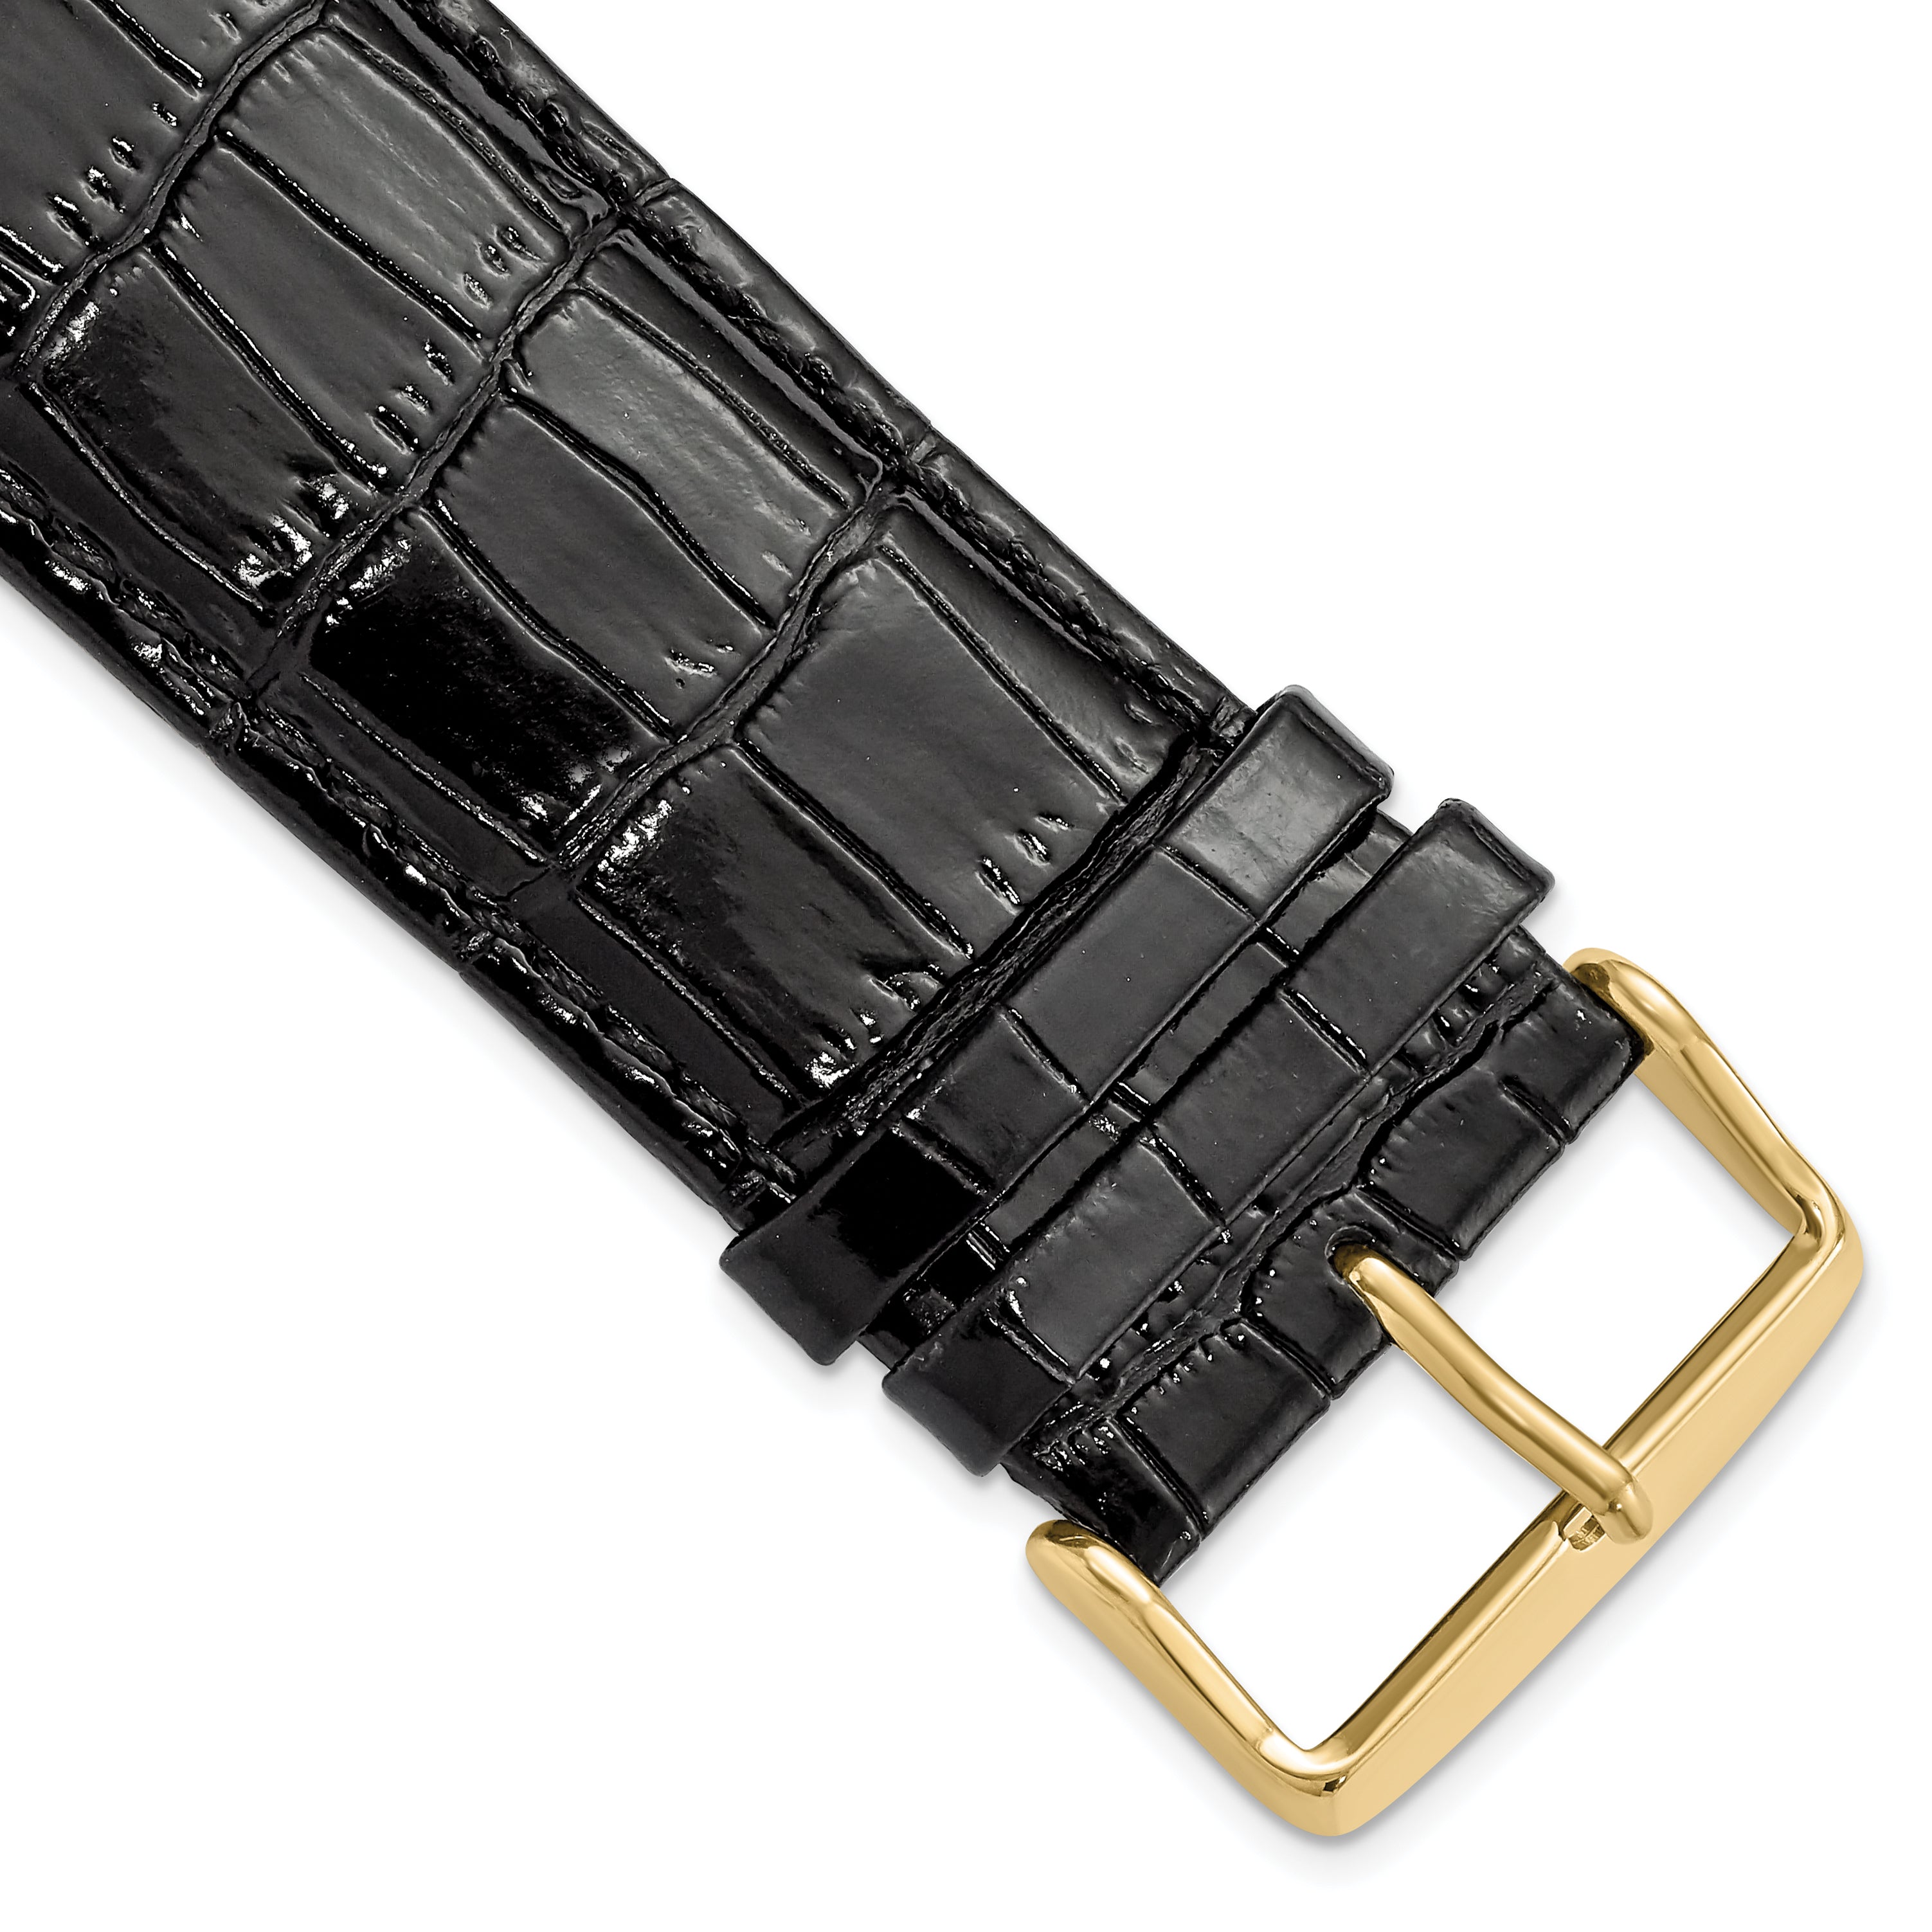 DeBeer 28mm Black Crocodile Grain Chronograph Leather with Gold-tone Buckle 7.5 inch Watch Band